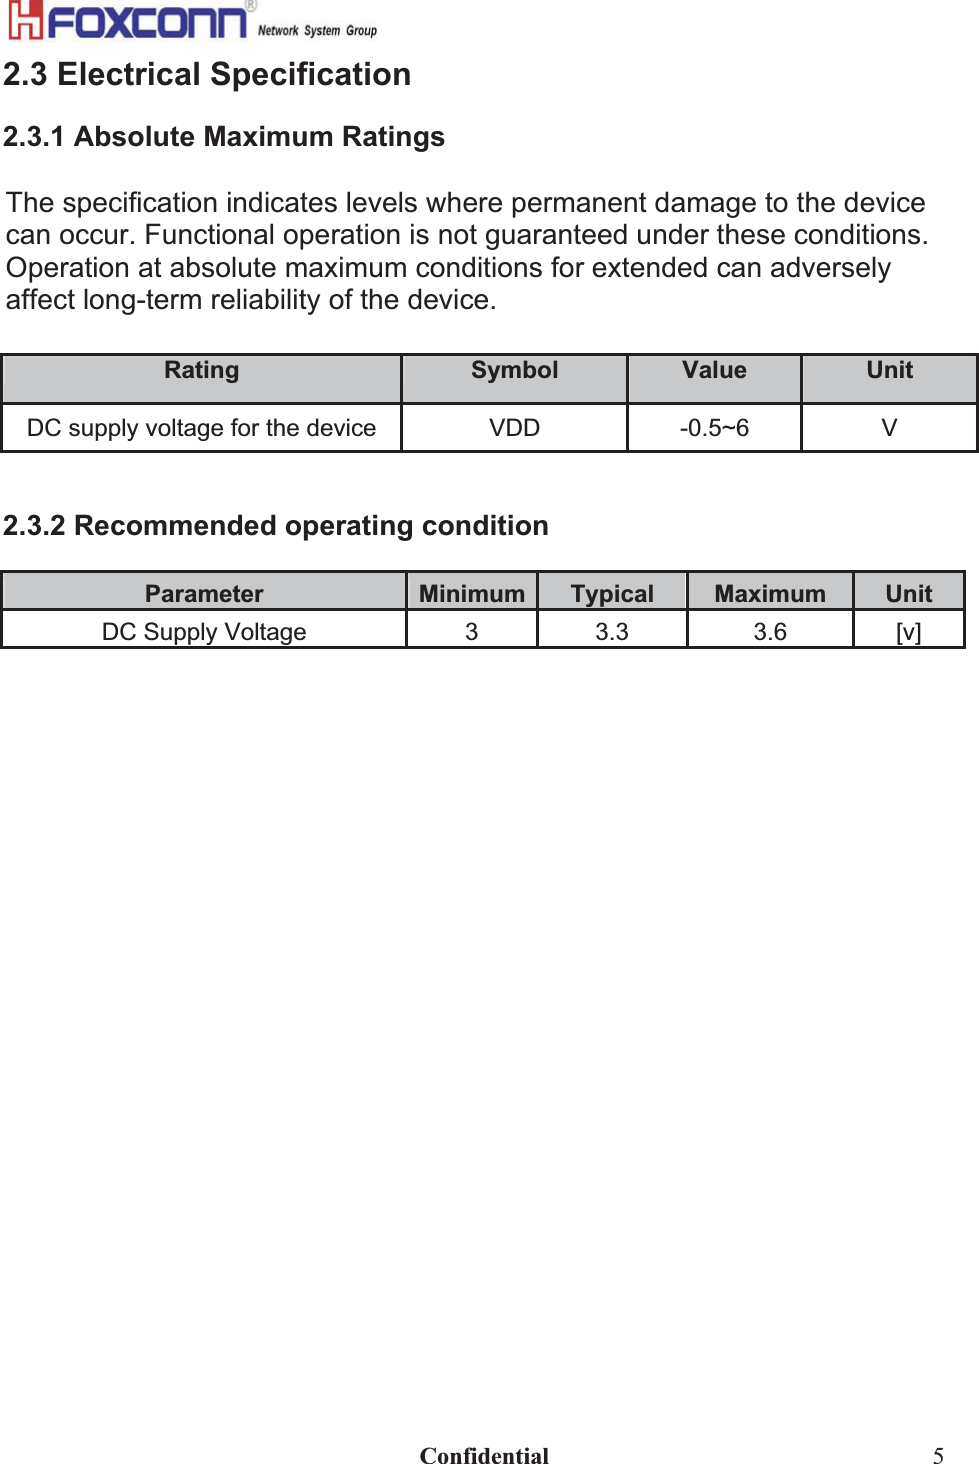                                                                              Confidential  52.3 Electrical Specification 2.3.1 Absolute Maximum Ratings The specification indicates levels where permanent damage to the device can occur. Functional operation is not guaranteed under these conditions. Operation at absolute maximum conditions for extended can adversely affect long-term reliability of the device. Rating  Symbol  Value  Unit DC supply voltage for the device  VDD  -0.5~6  V 2.3.2 Recommended operating condition Parameter Minimum Typical   Maximum UnitDC Supply Voltage   3  3.3ʳ 3.6  [v]  2.3.3 Current consumption in active on WLAN modes 